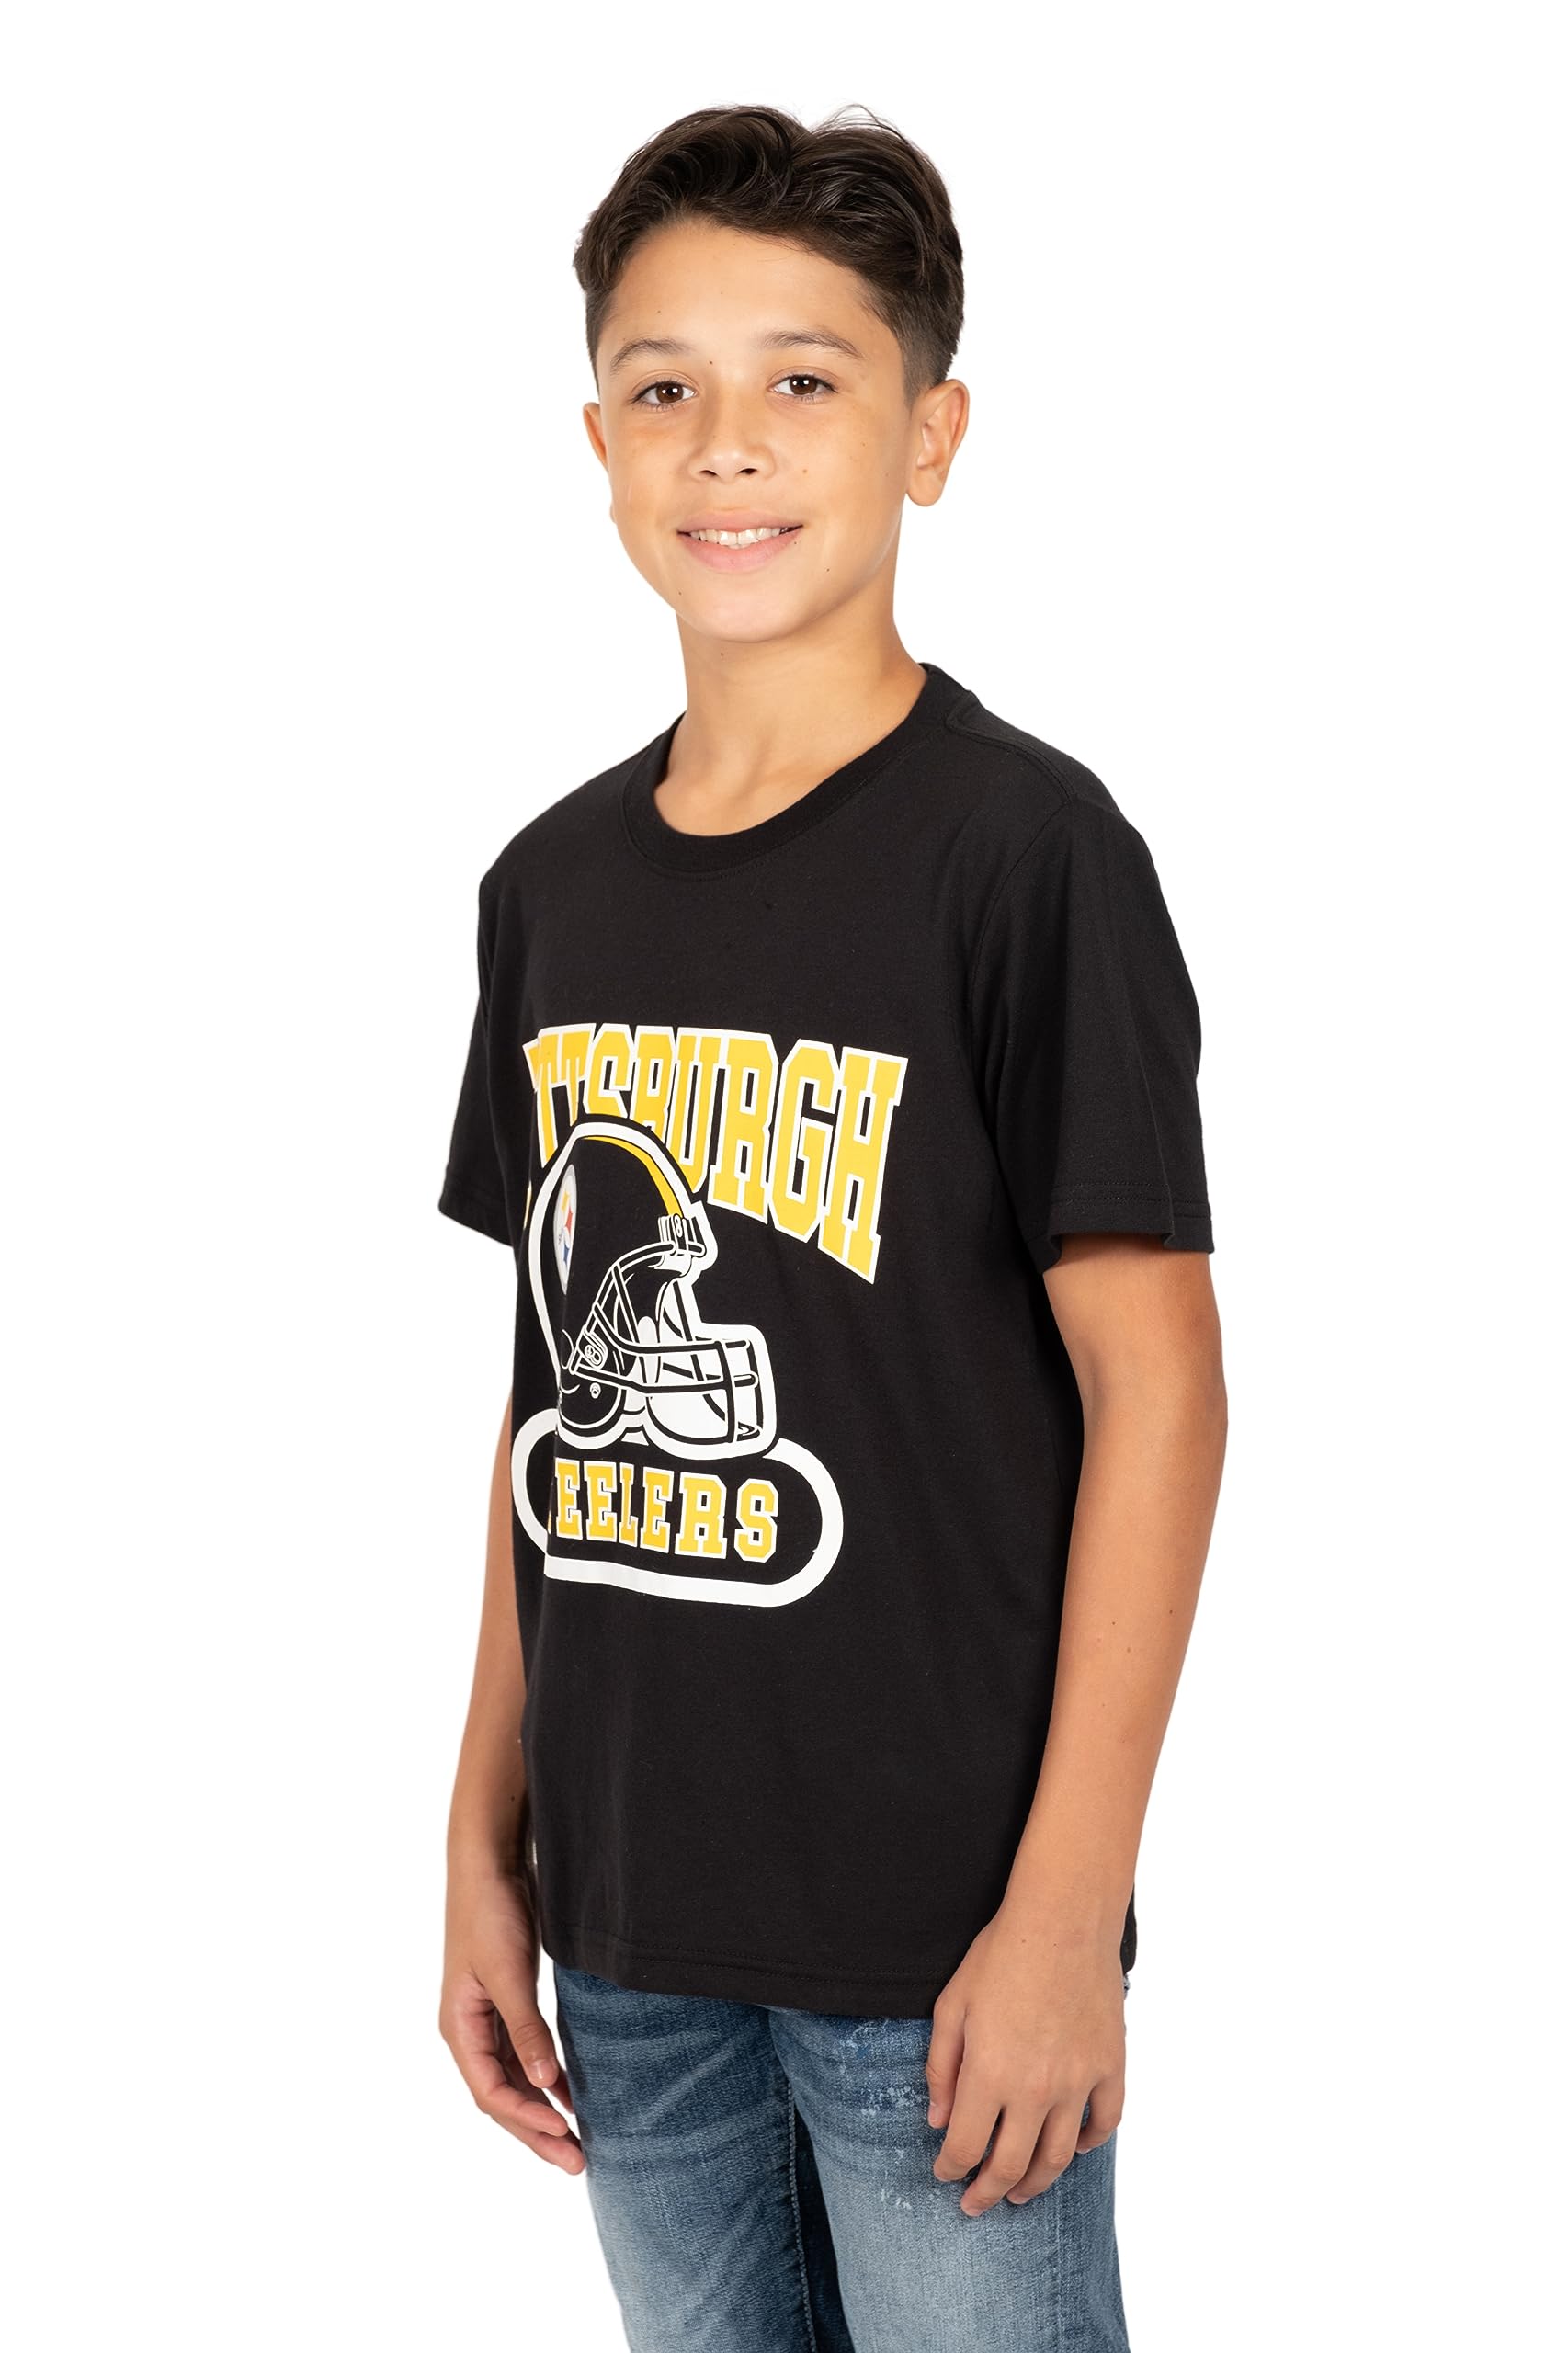 Ultra Game NFL Pittsburgh Steelers Youth Super Soft Game Day Crew Neck T-Shirt|Pittsburgh Steelers